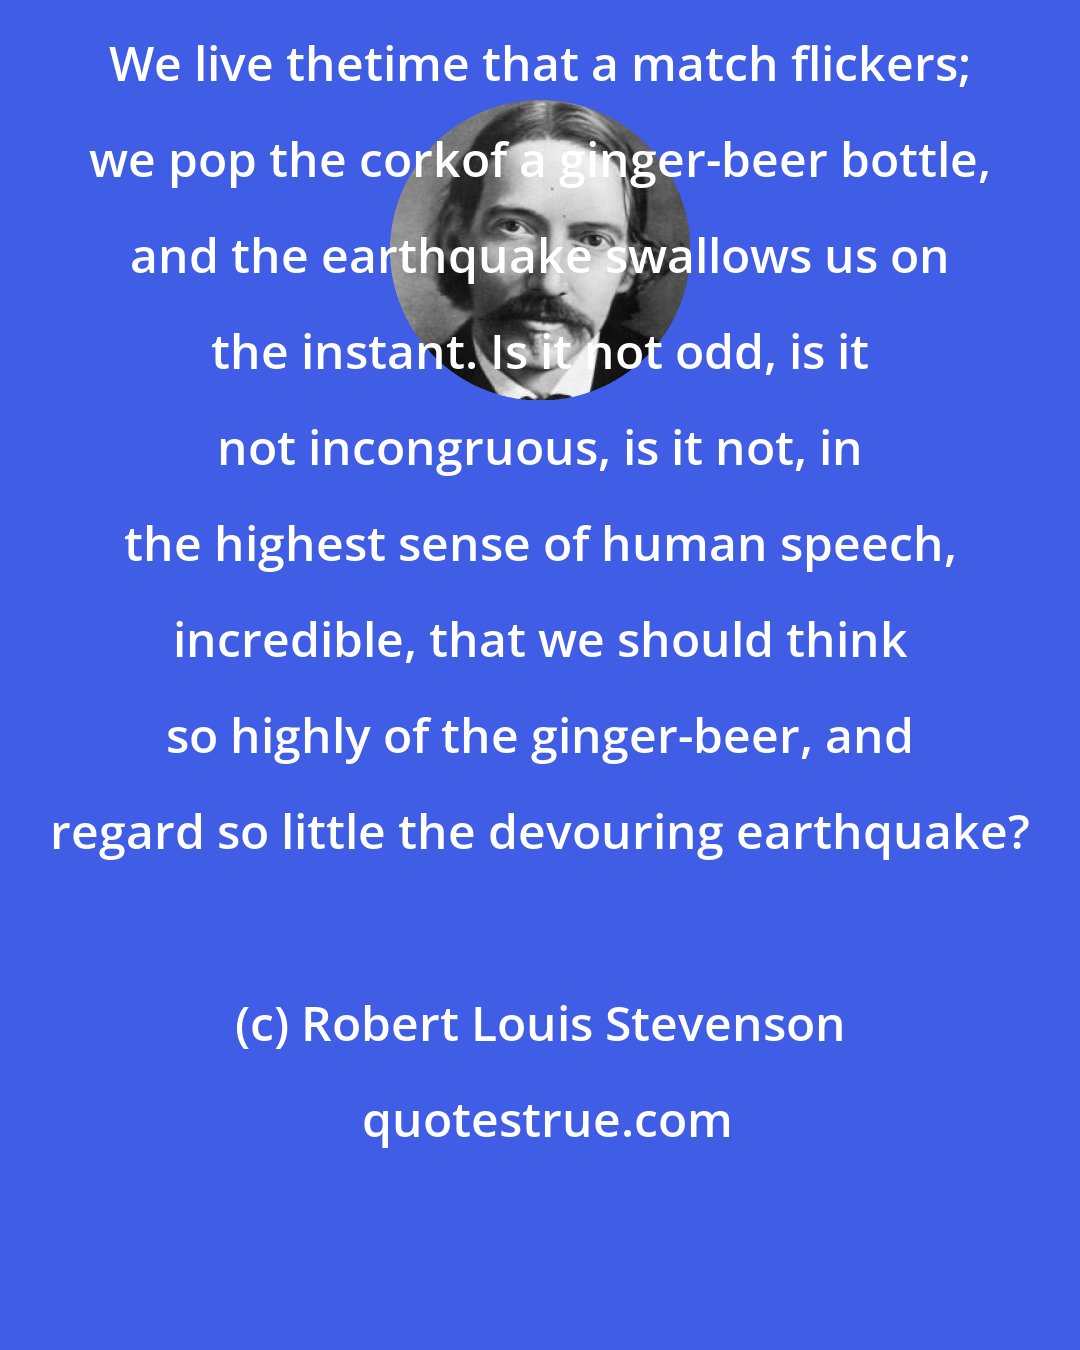 Robert Louis Stevenson: We live thetime that a match flickers; we pop the corkof a ginger-beer bottle, and the earthquake swallows us on the instant. Is it not odd, is it not incongruous, is it not, in the highest sense of human speech, incredible, that we should think so highly of the ginger-beer, and regard so little the devouring earthquake?